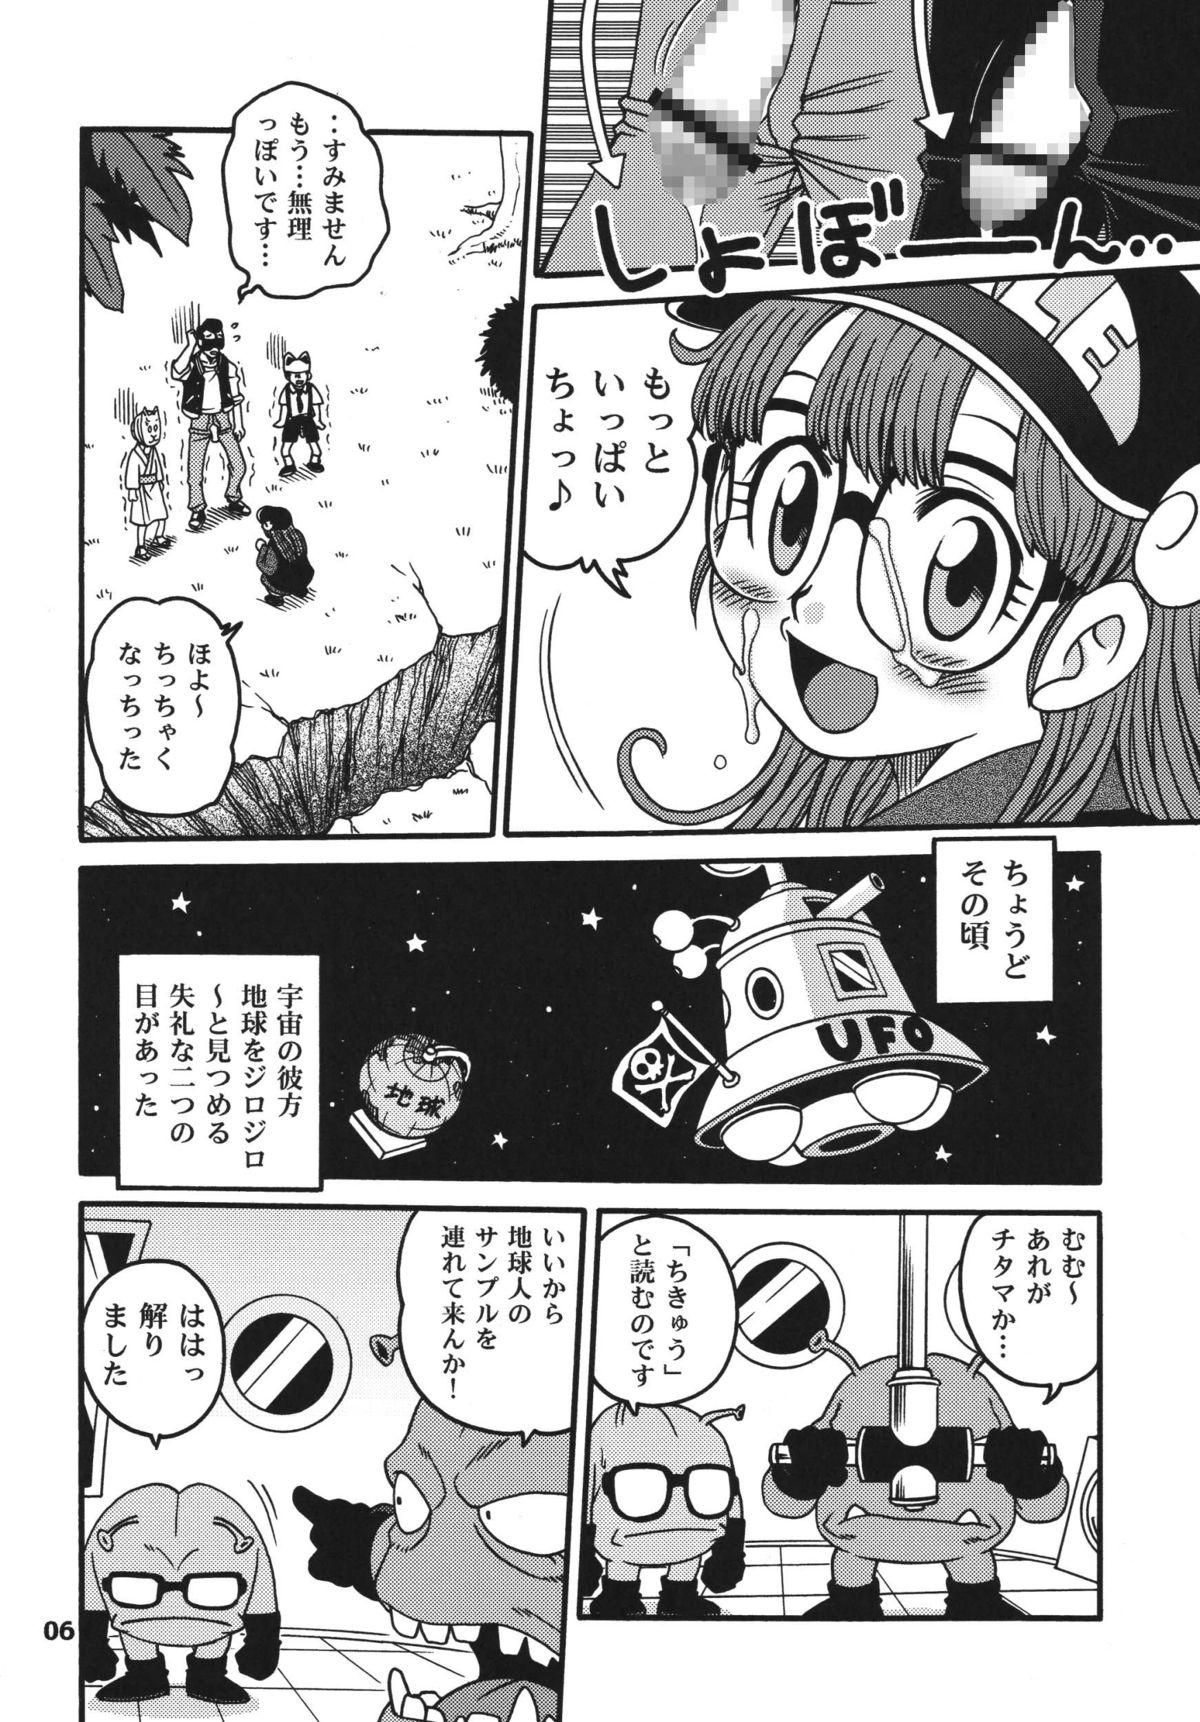 One Project Arale 2 - Dr. slump Playing - Page 6